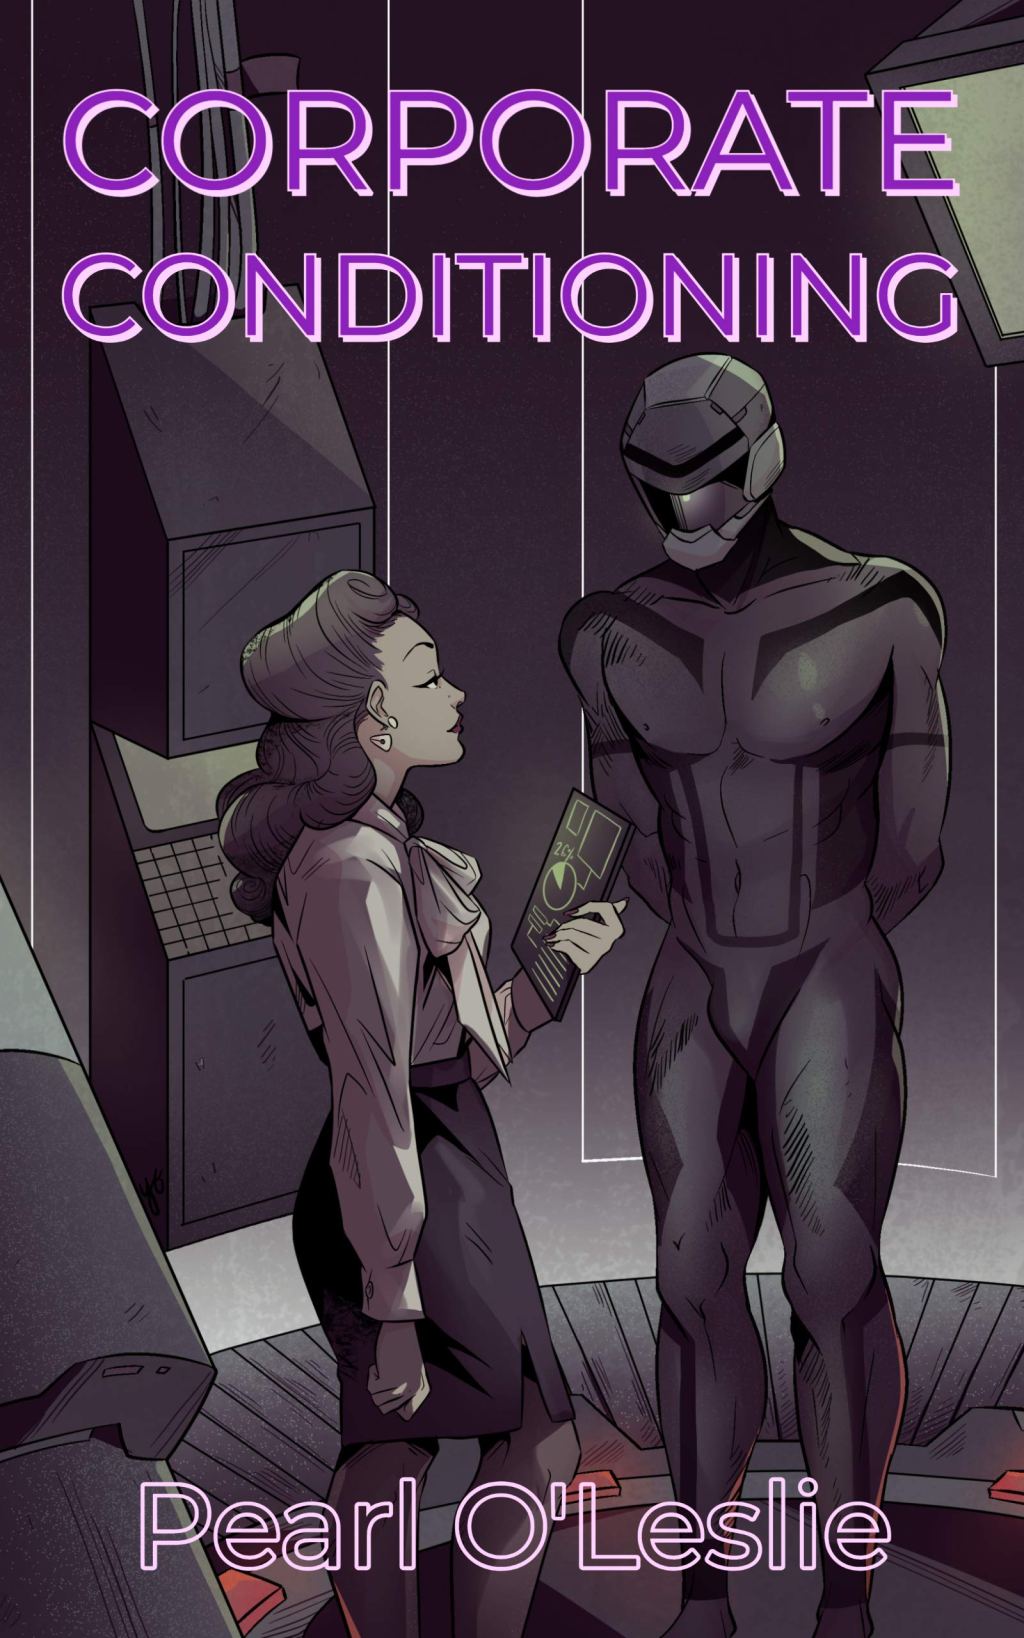 Book Review: Corporate Conditioning by Pearl O’Leslie (scifi)